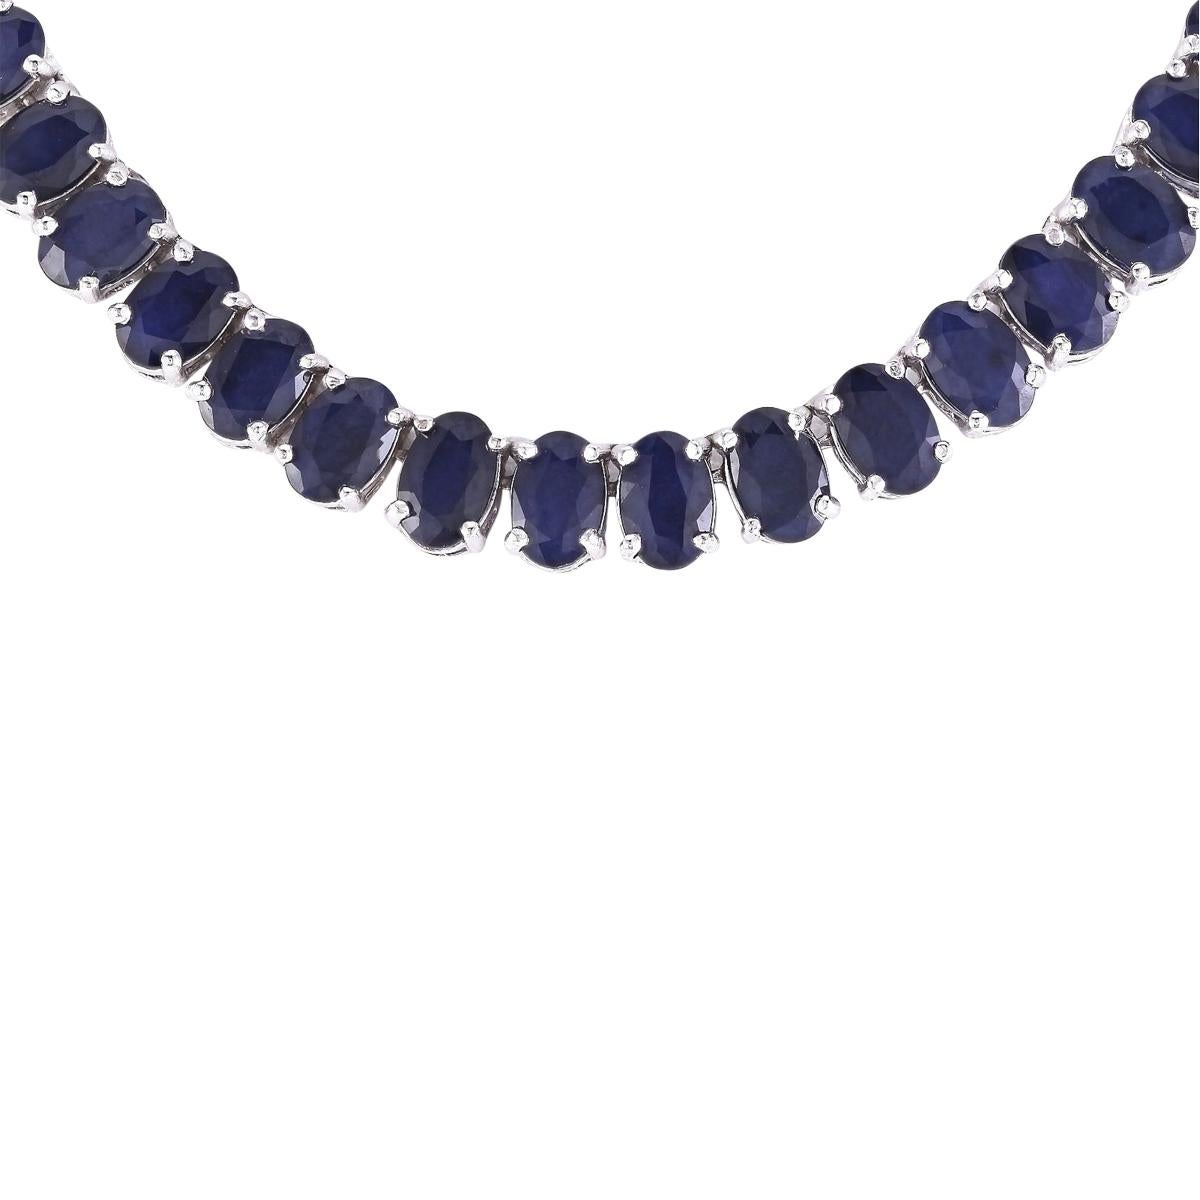 62.00 Carat Sapphire 14 Karat White Gold Necklace
Stamped: 14K White Gold
Total Necklace Weight: 32.0 Grams
Necklace Length: 17 Inches
Necklace Width: 6.00 mm
Gemstone Weight: Total  Sapphire Weight is 62.00 Carat (6.00x4.00 mm)
Color: Blue
Face